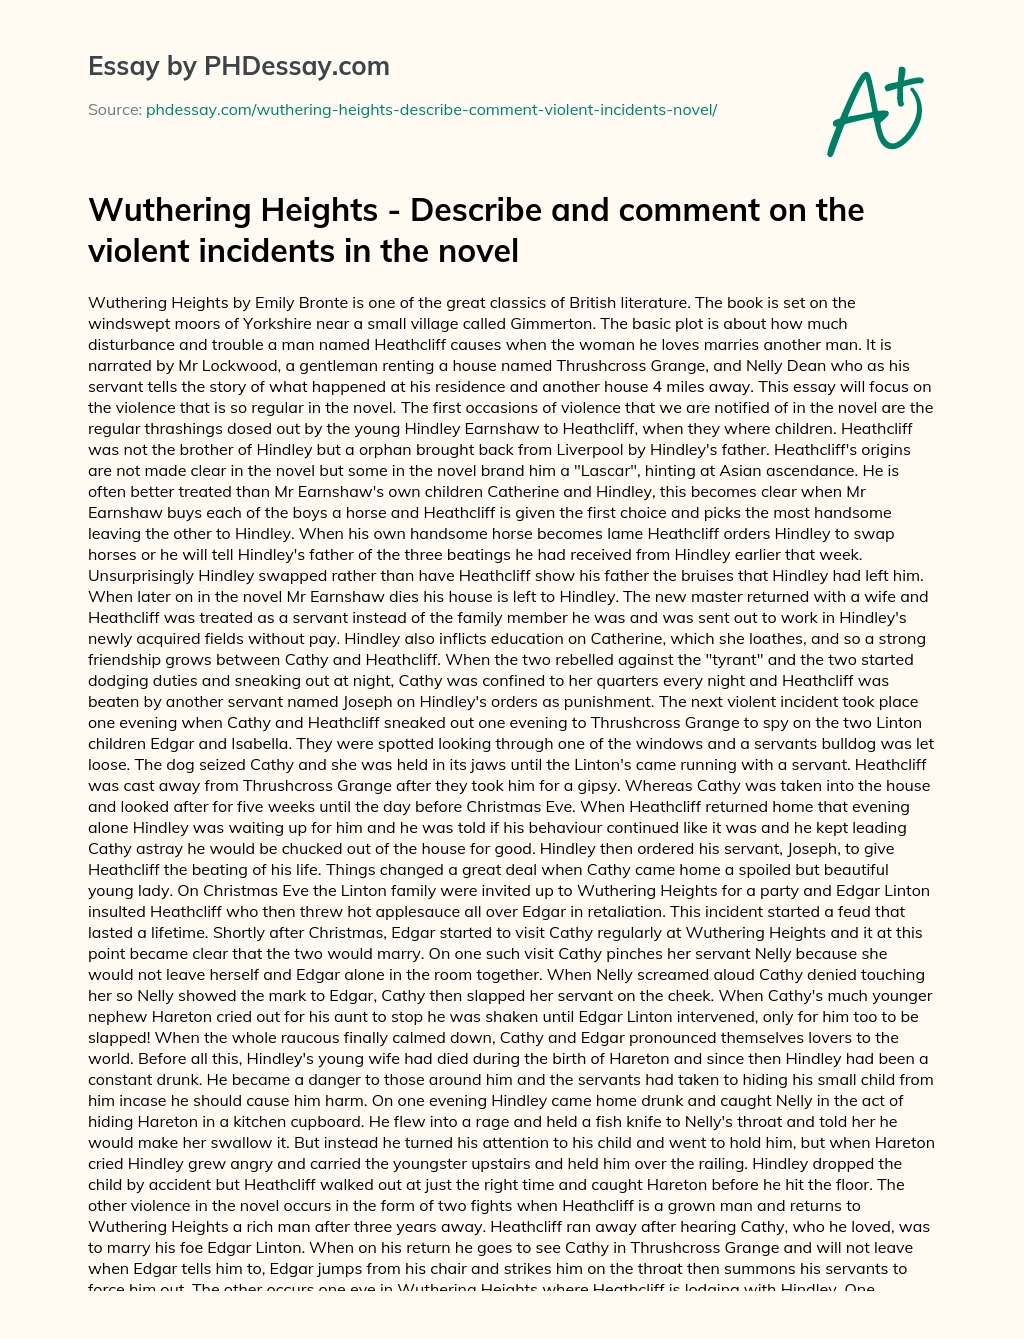 violence in wuthering heights essay